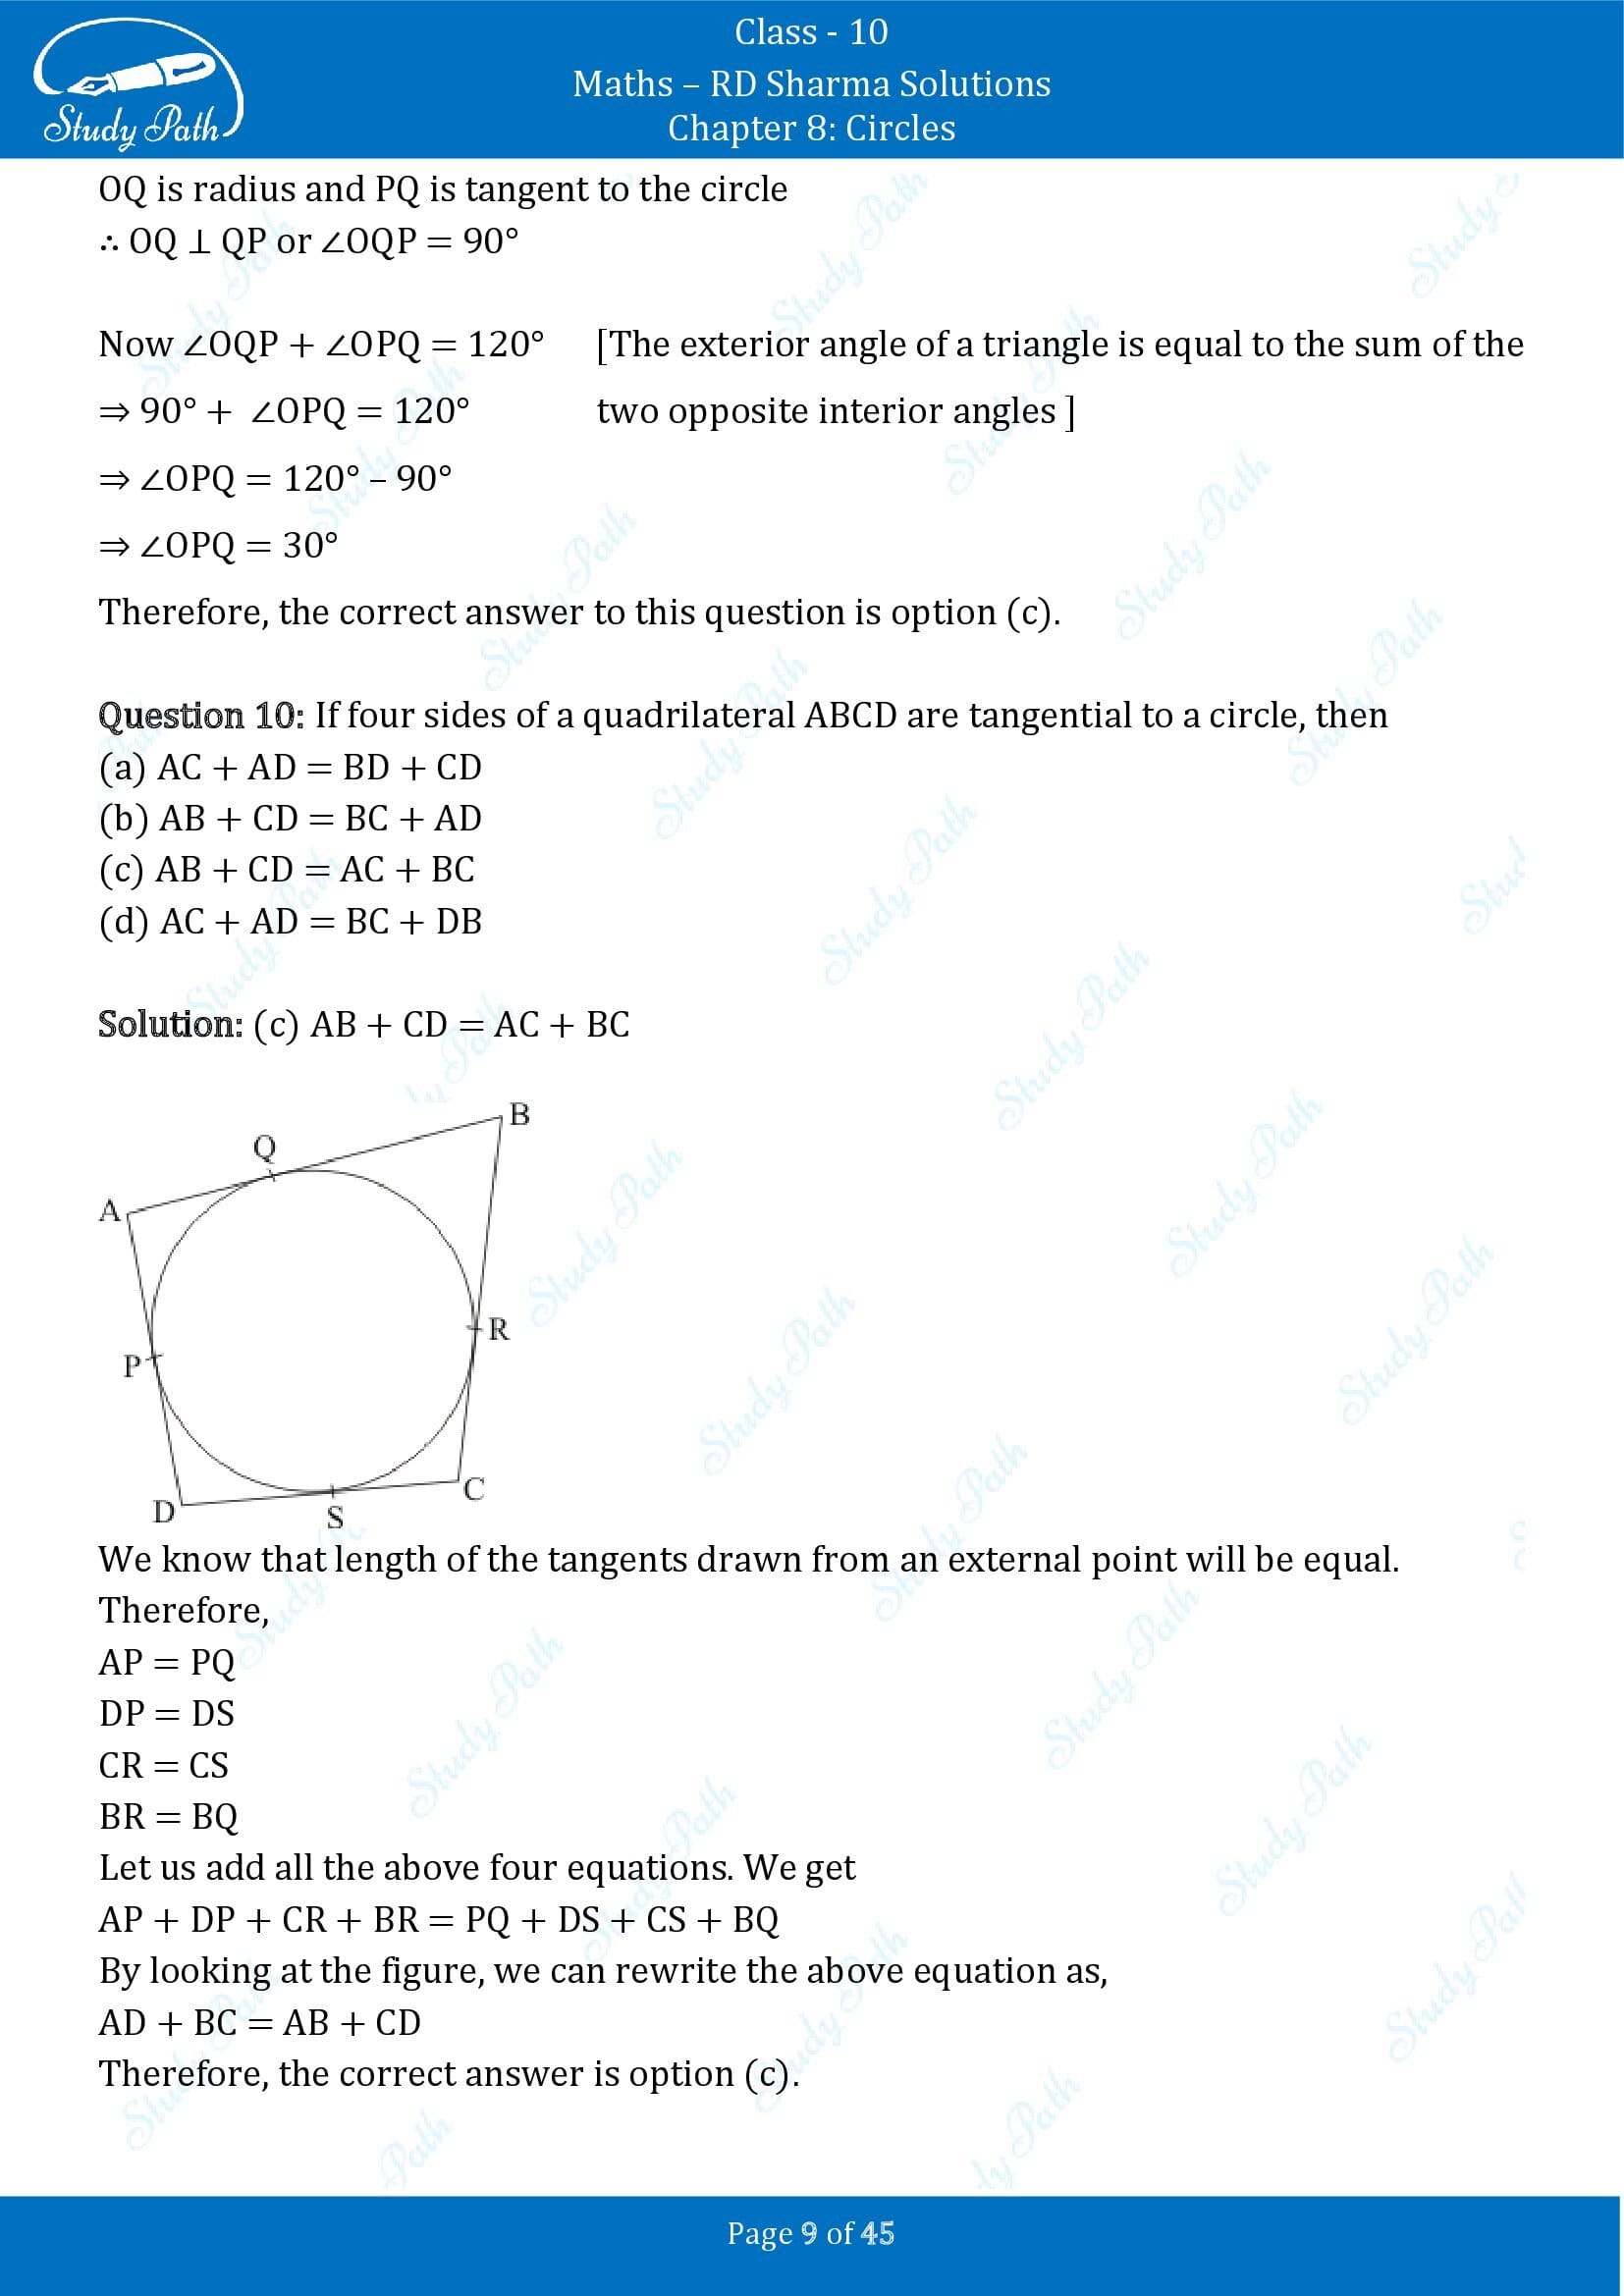 RD Sharma Solutions Class 10 Chapter 8 Circles Multiple Choice Questions MCQs 00009